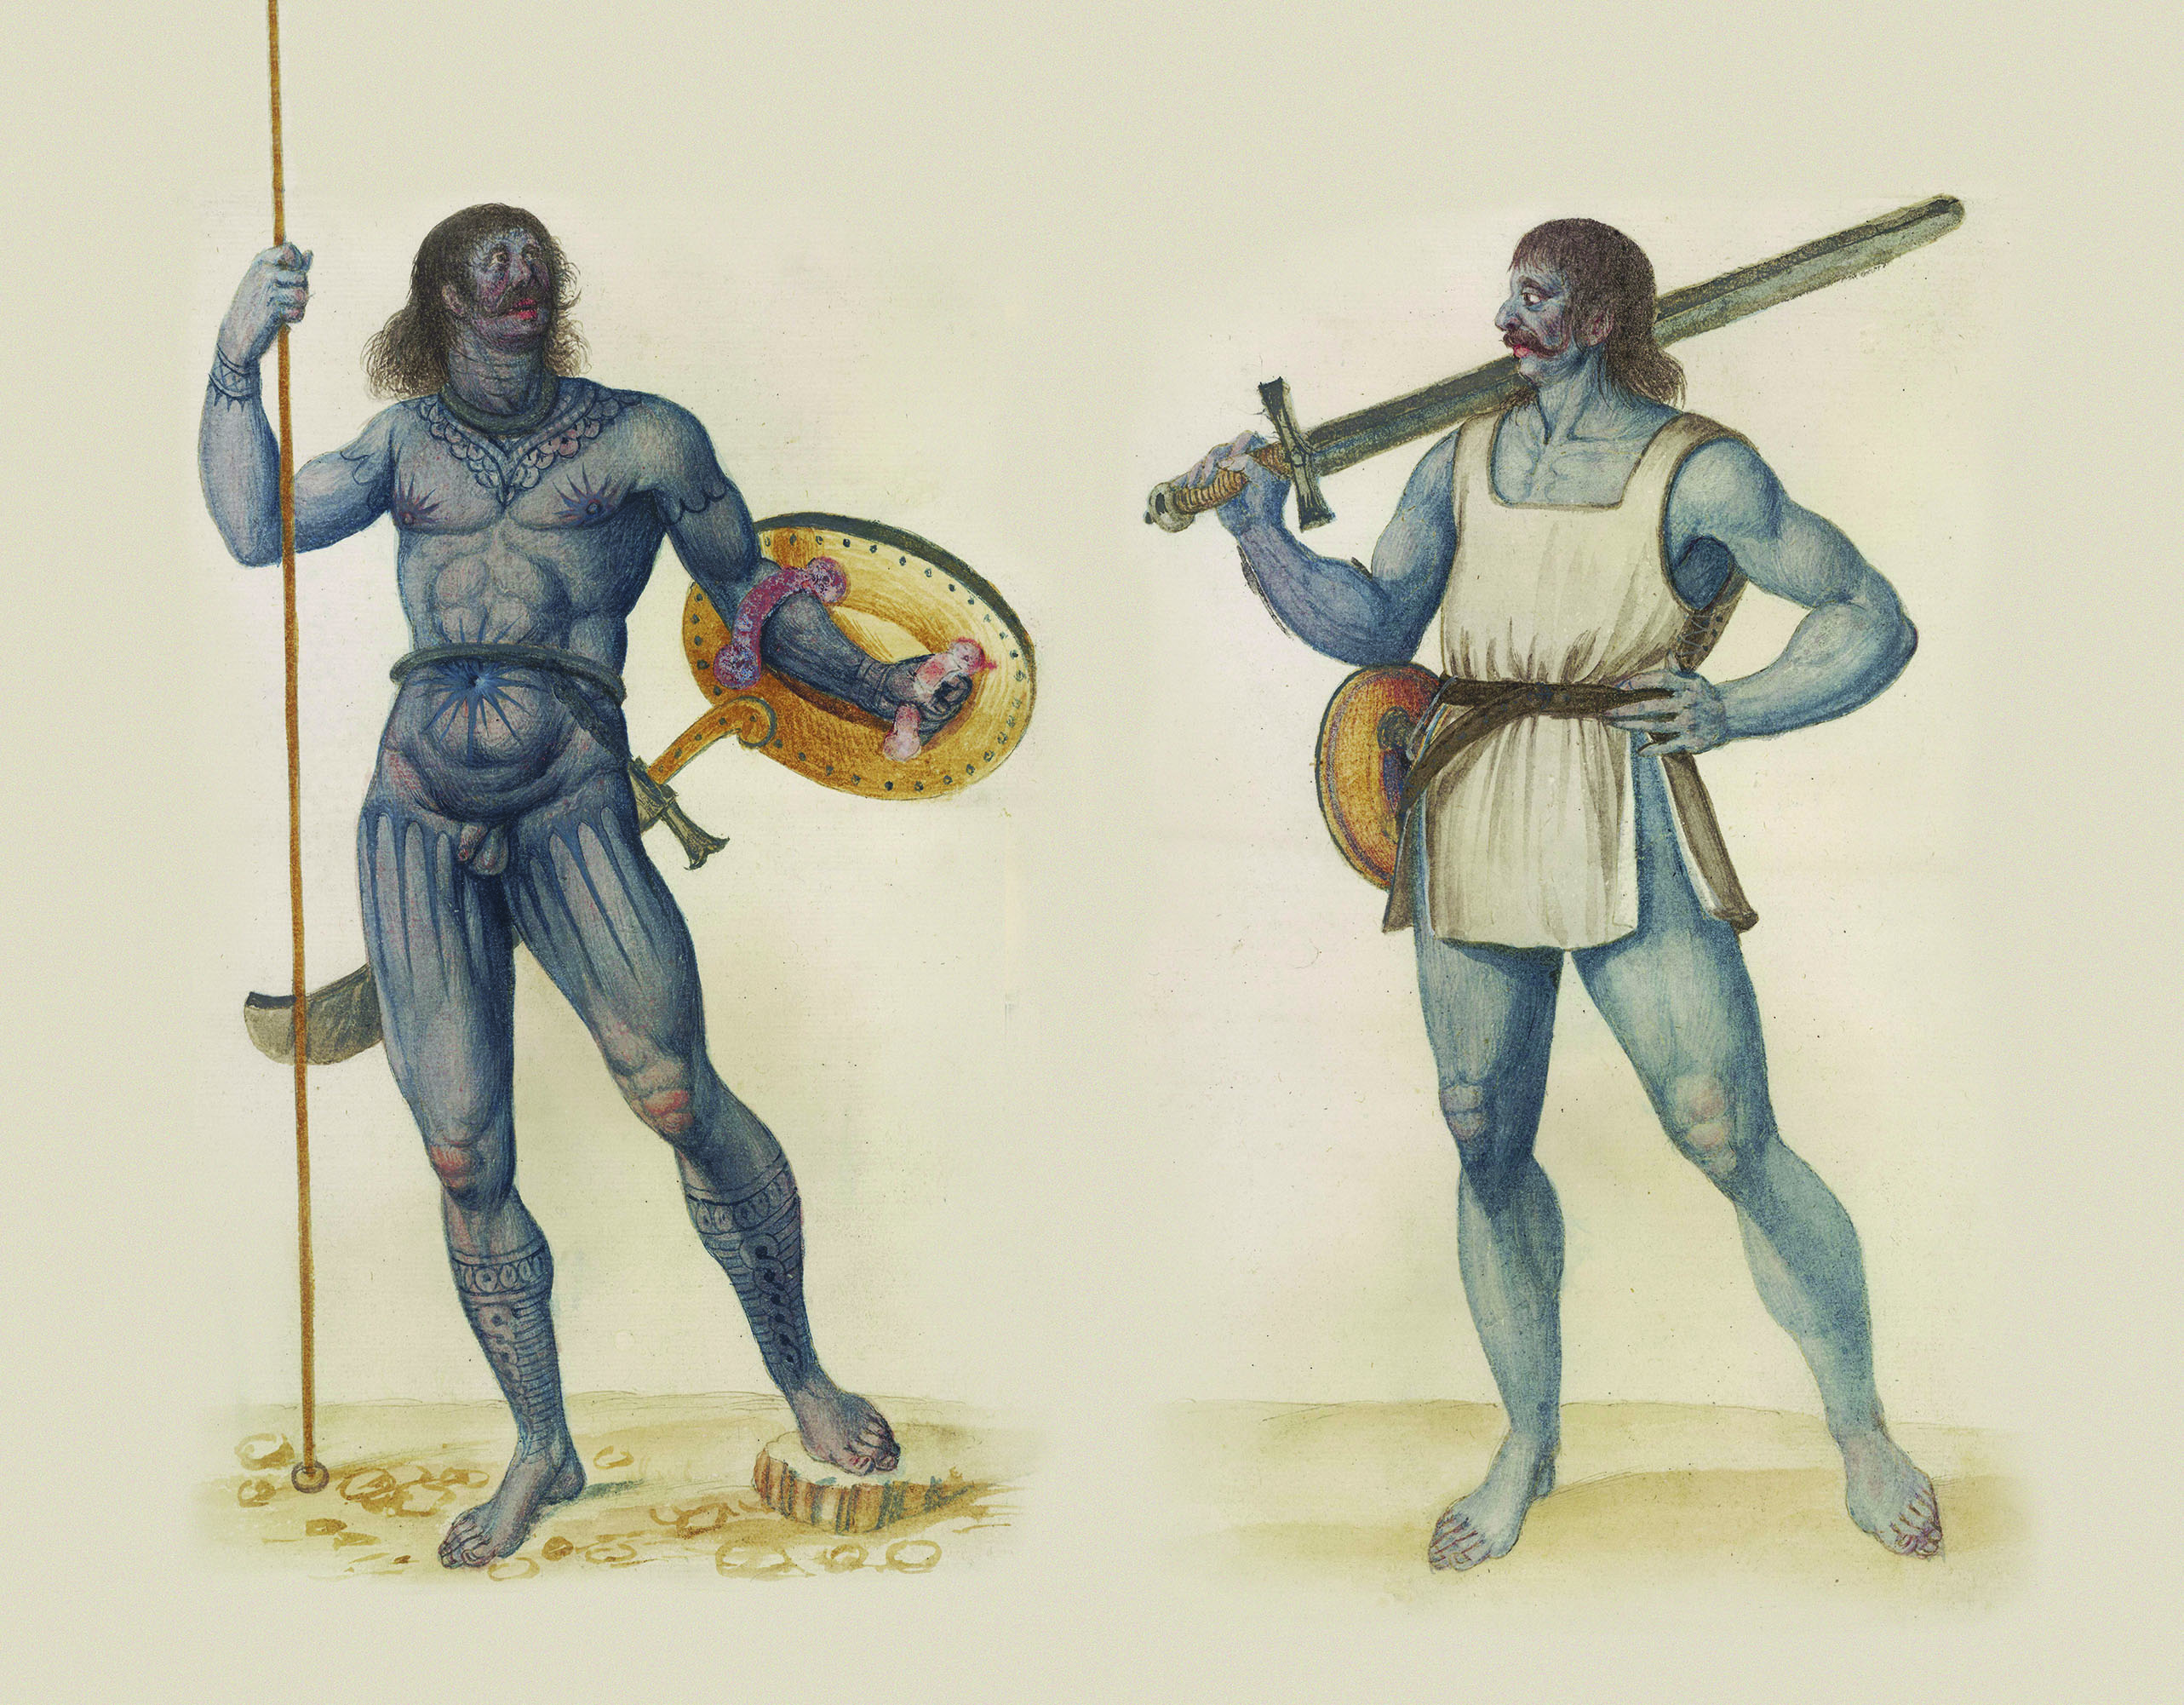 As with many later depictions of Pictish warriors, these 16th century images portray the fighters as being painted blue—likely an exaggeration of the Picts’ affinity for body tattoos. / British Museum